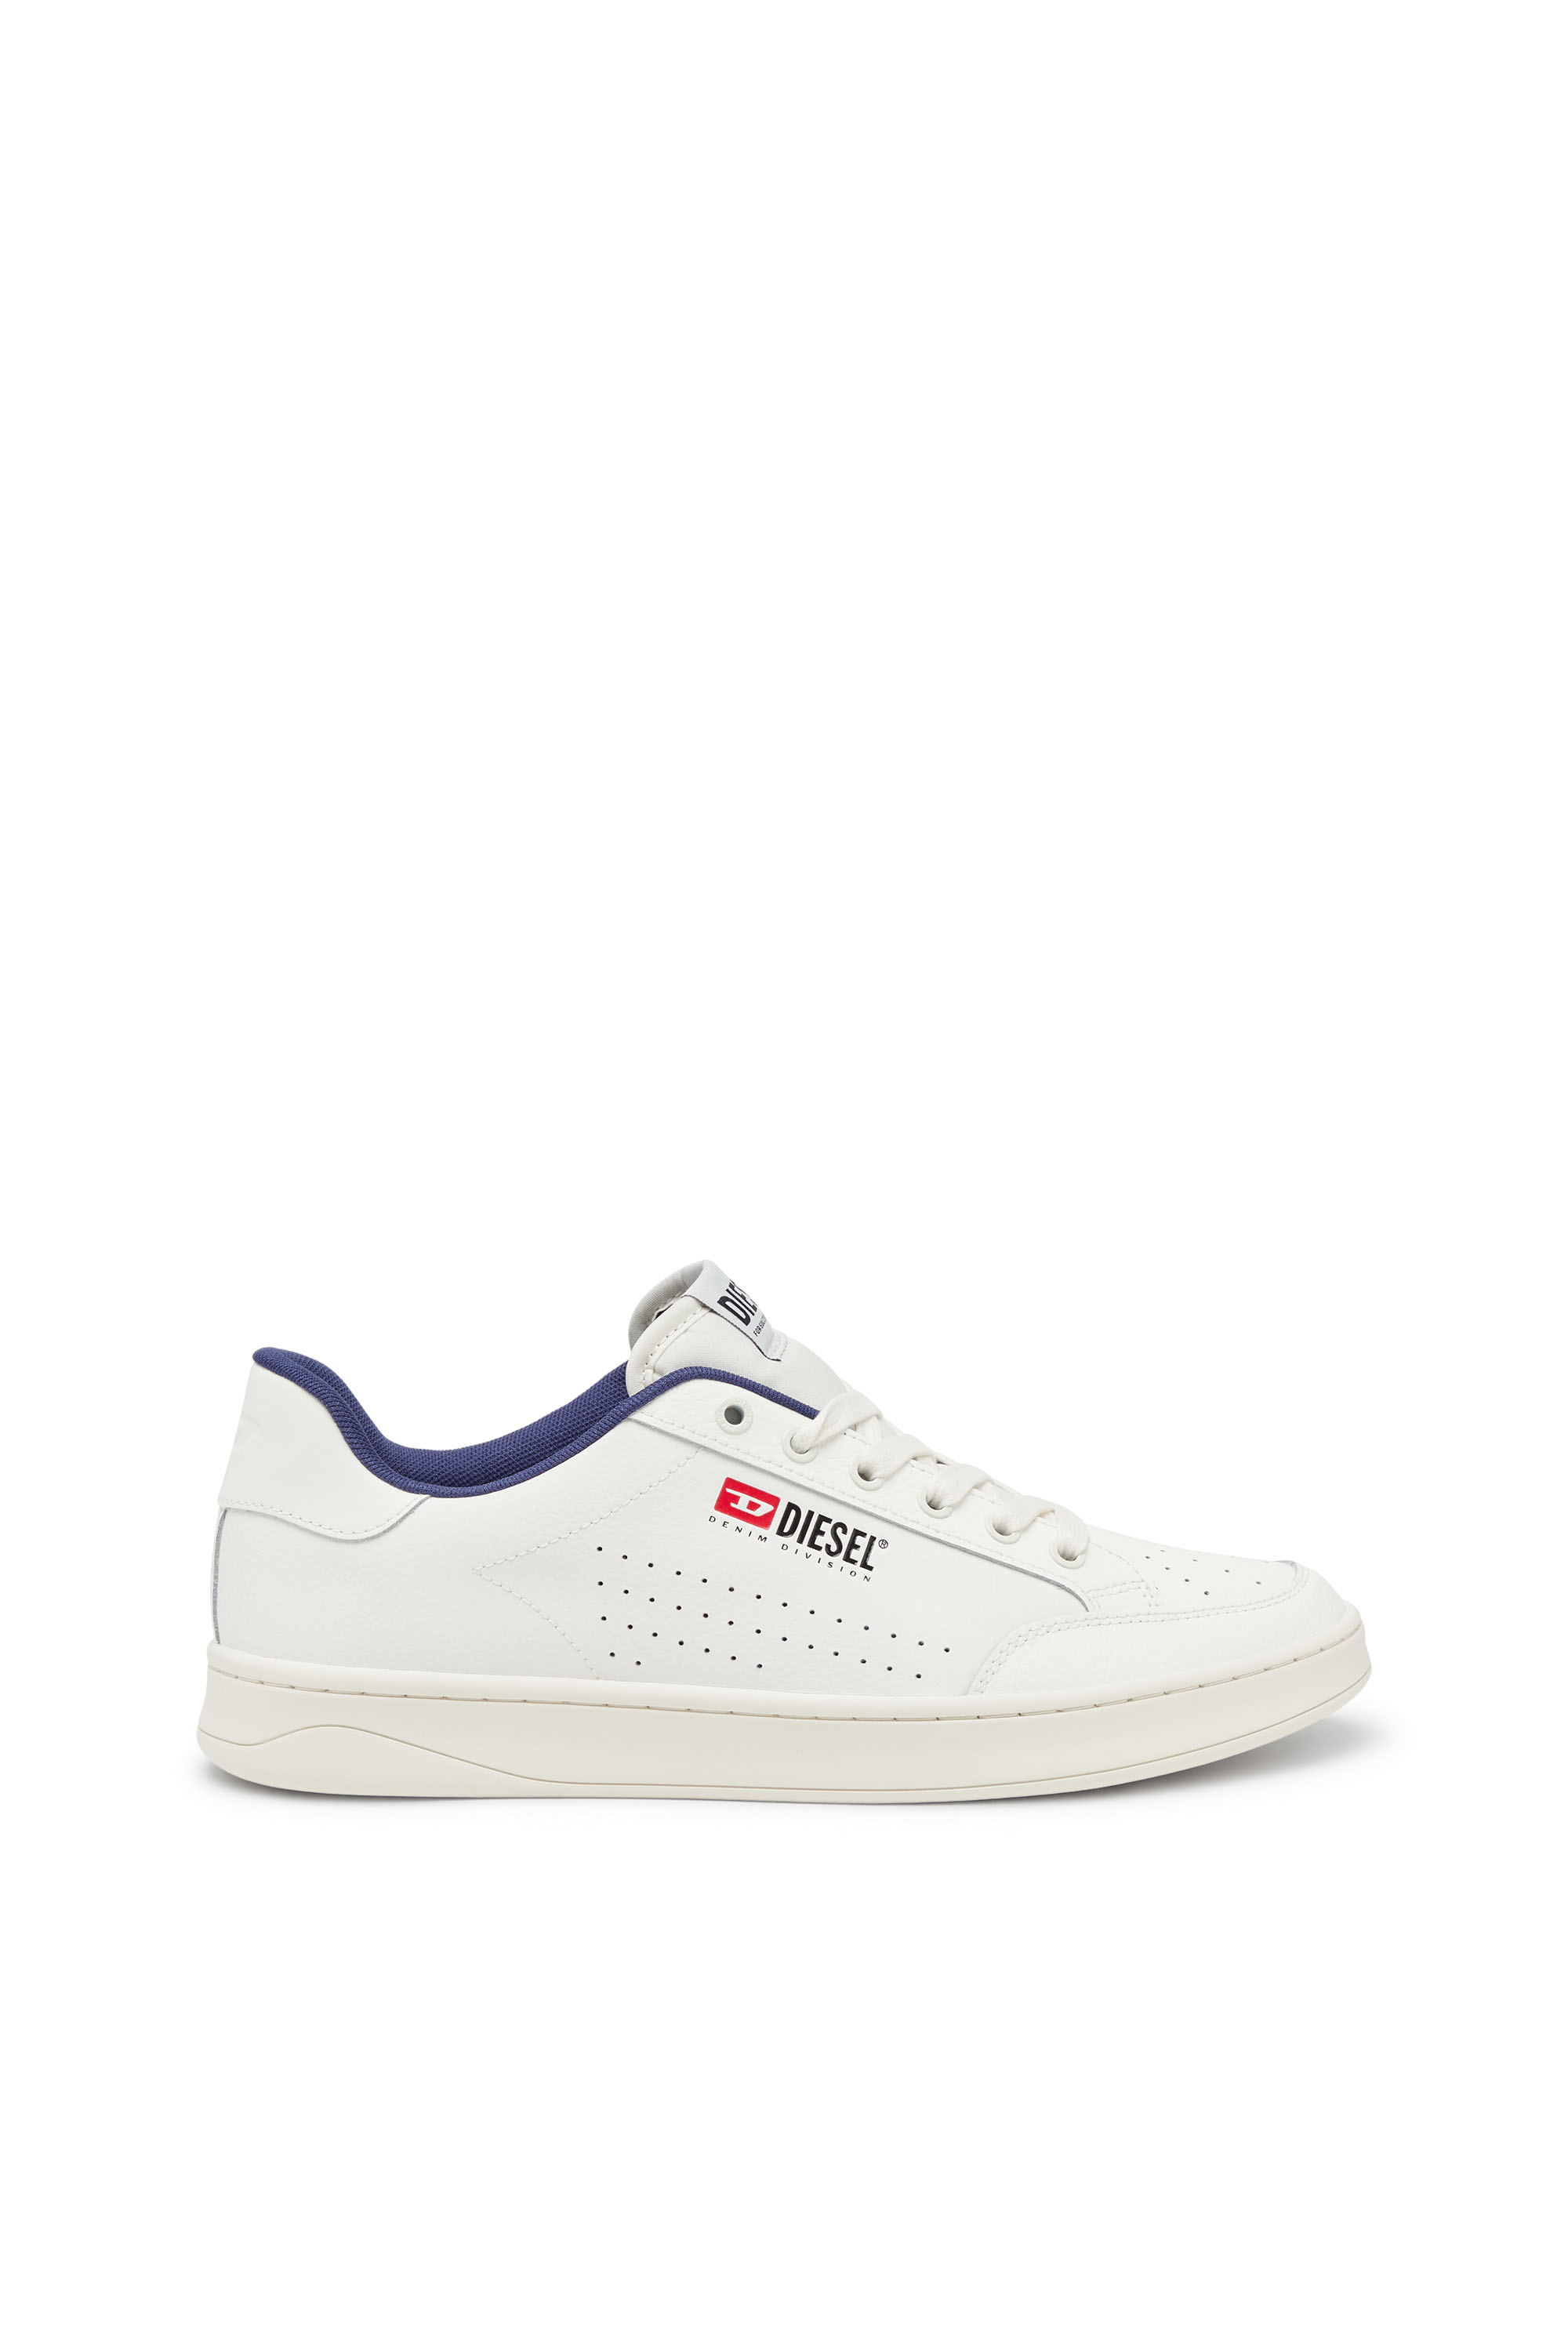 Diesel - S-ATHENE VTG, Man S-Athene-Retro sneakers in perforated leather in Multicolor - Image 1